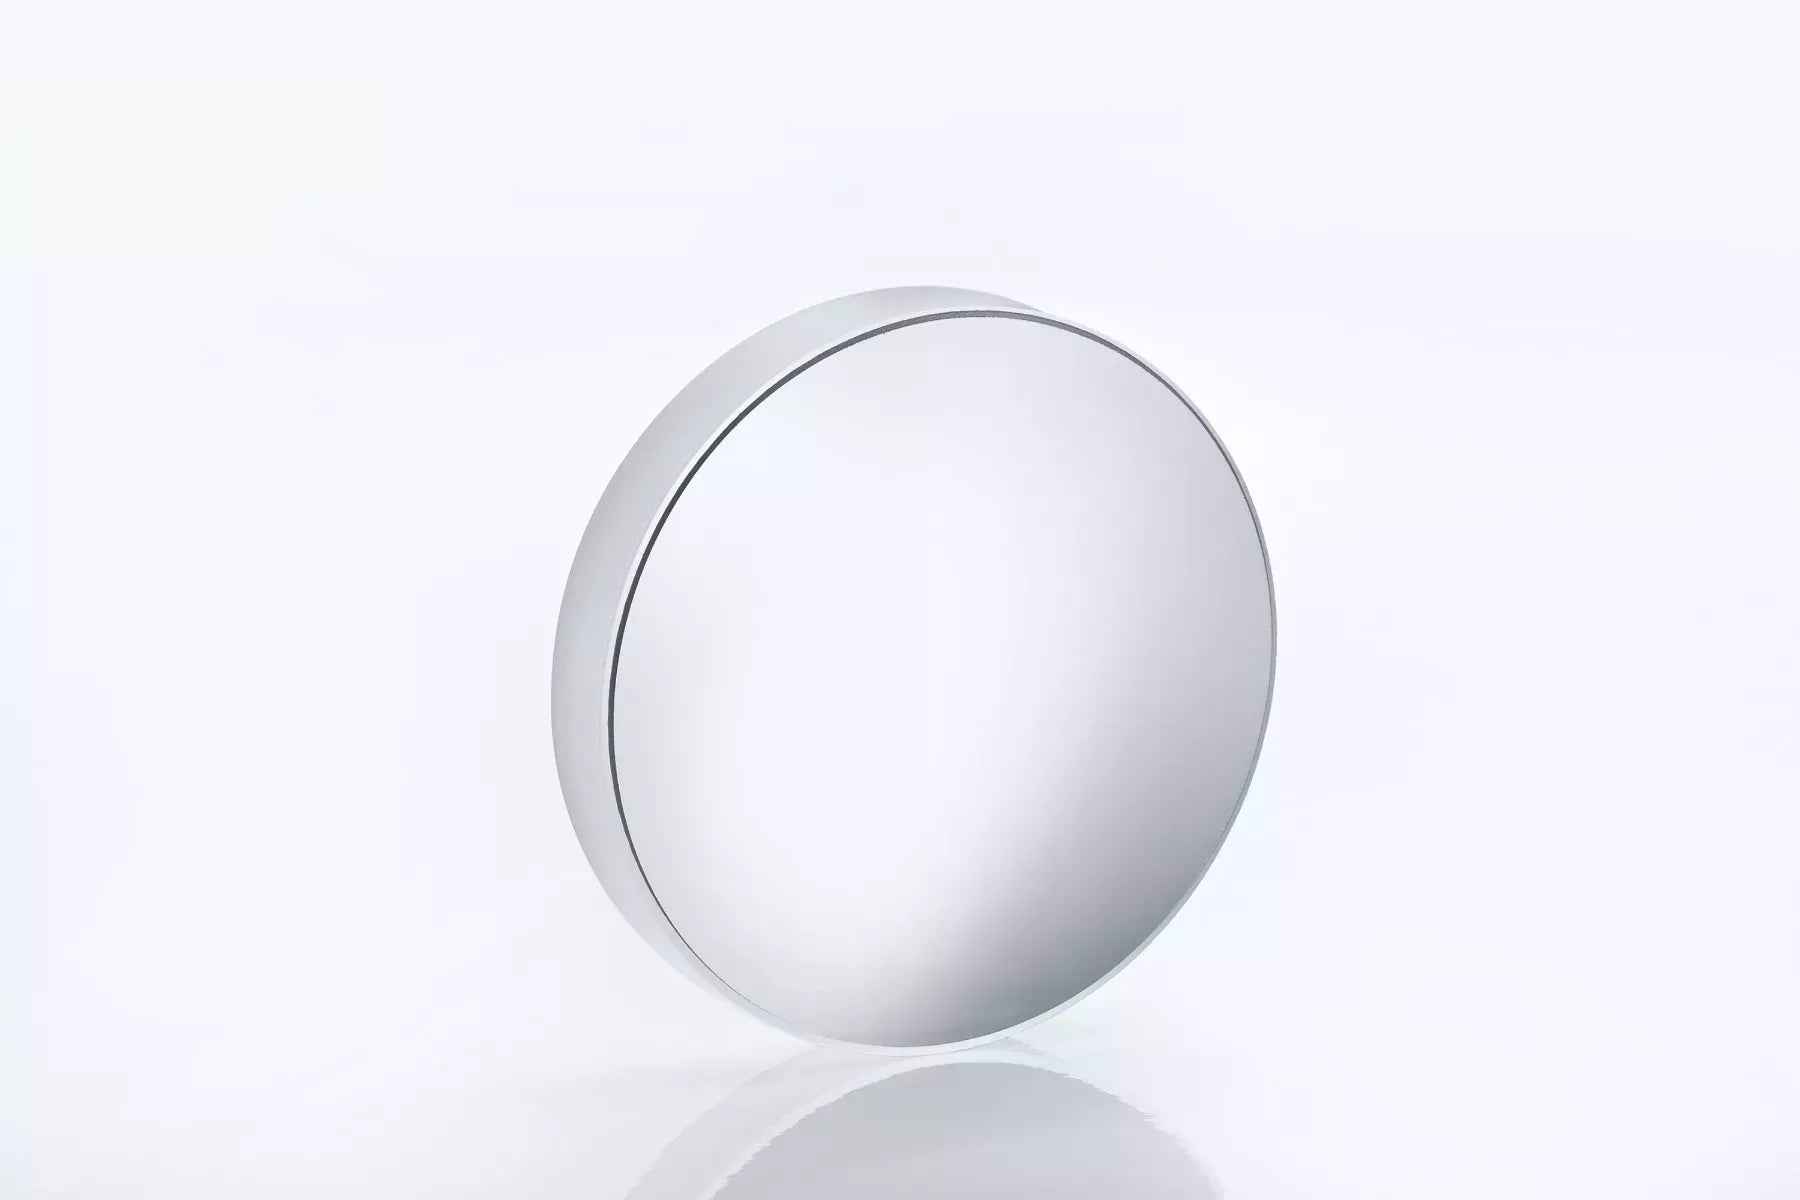 MCQ4525-XS-Concave mirror, 45mmFL, 25mm dia, Protected gold coating, White float